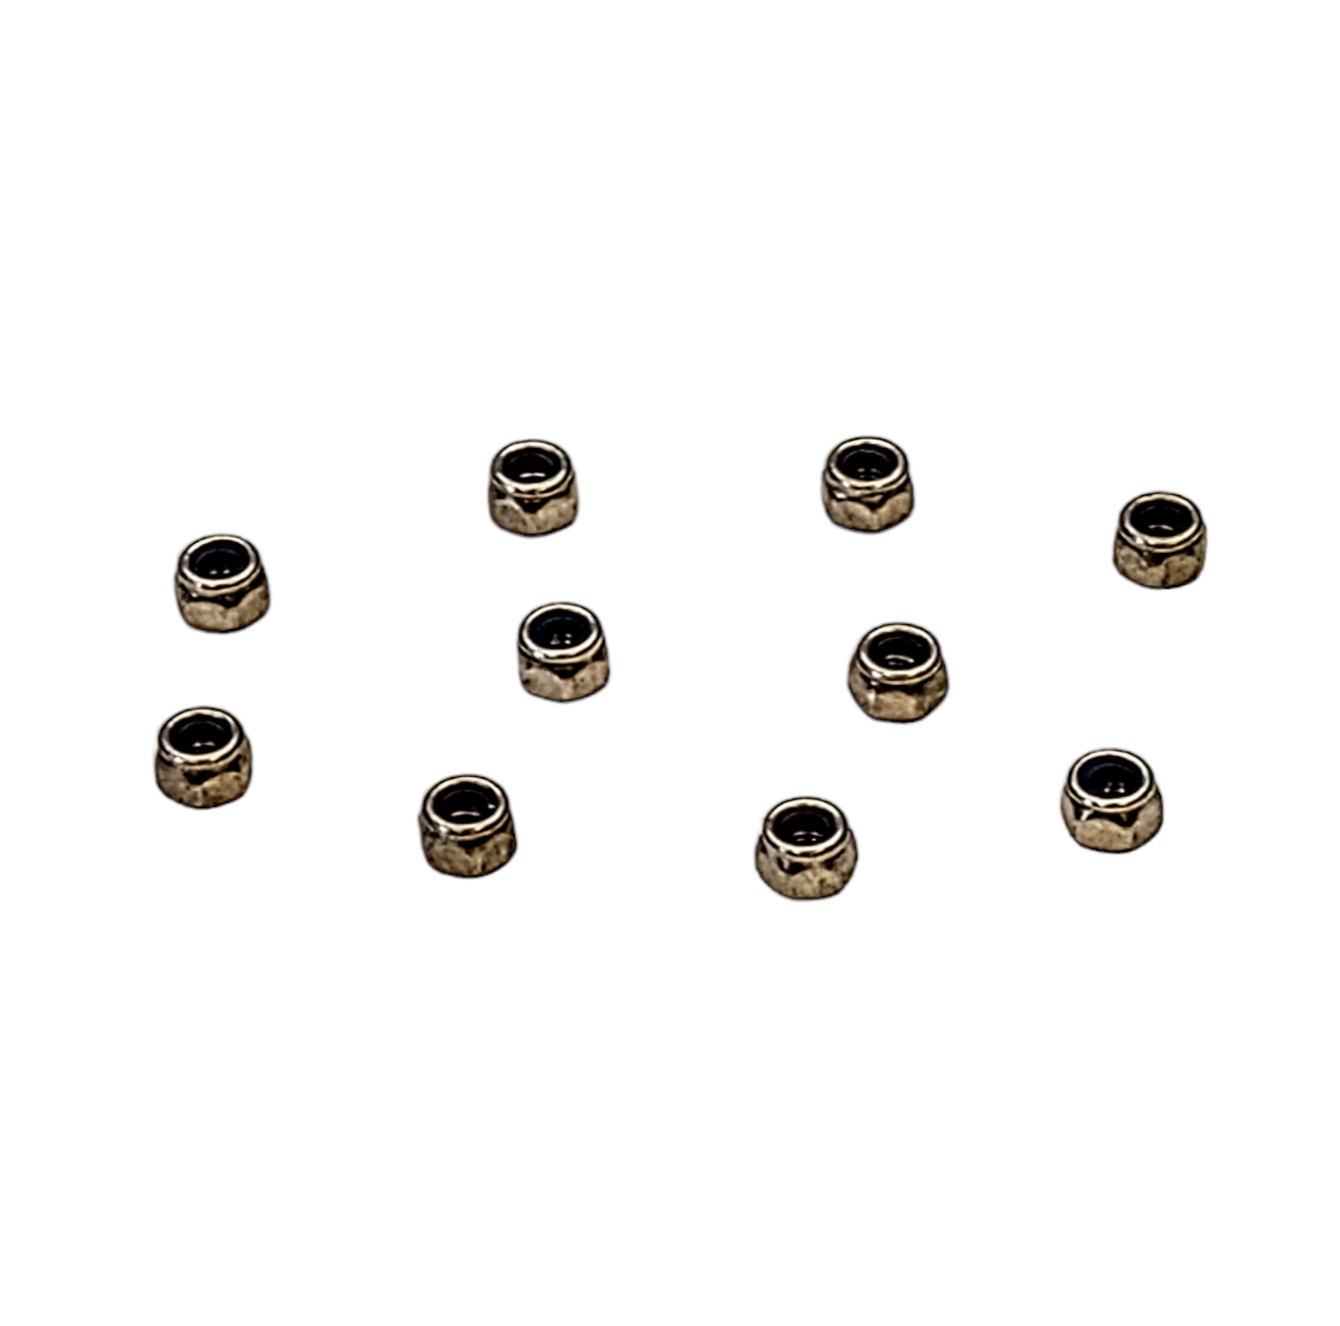 A31420 Pack of 10 M4 Serrated Flange nuts